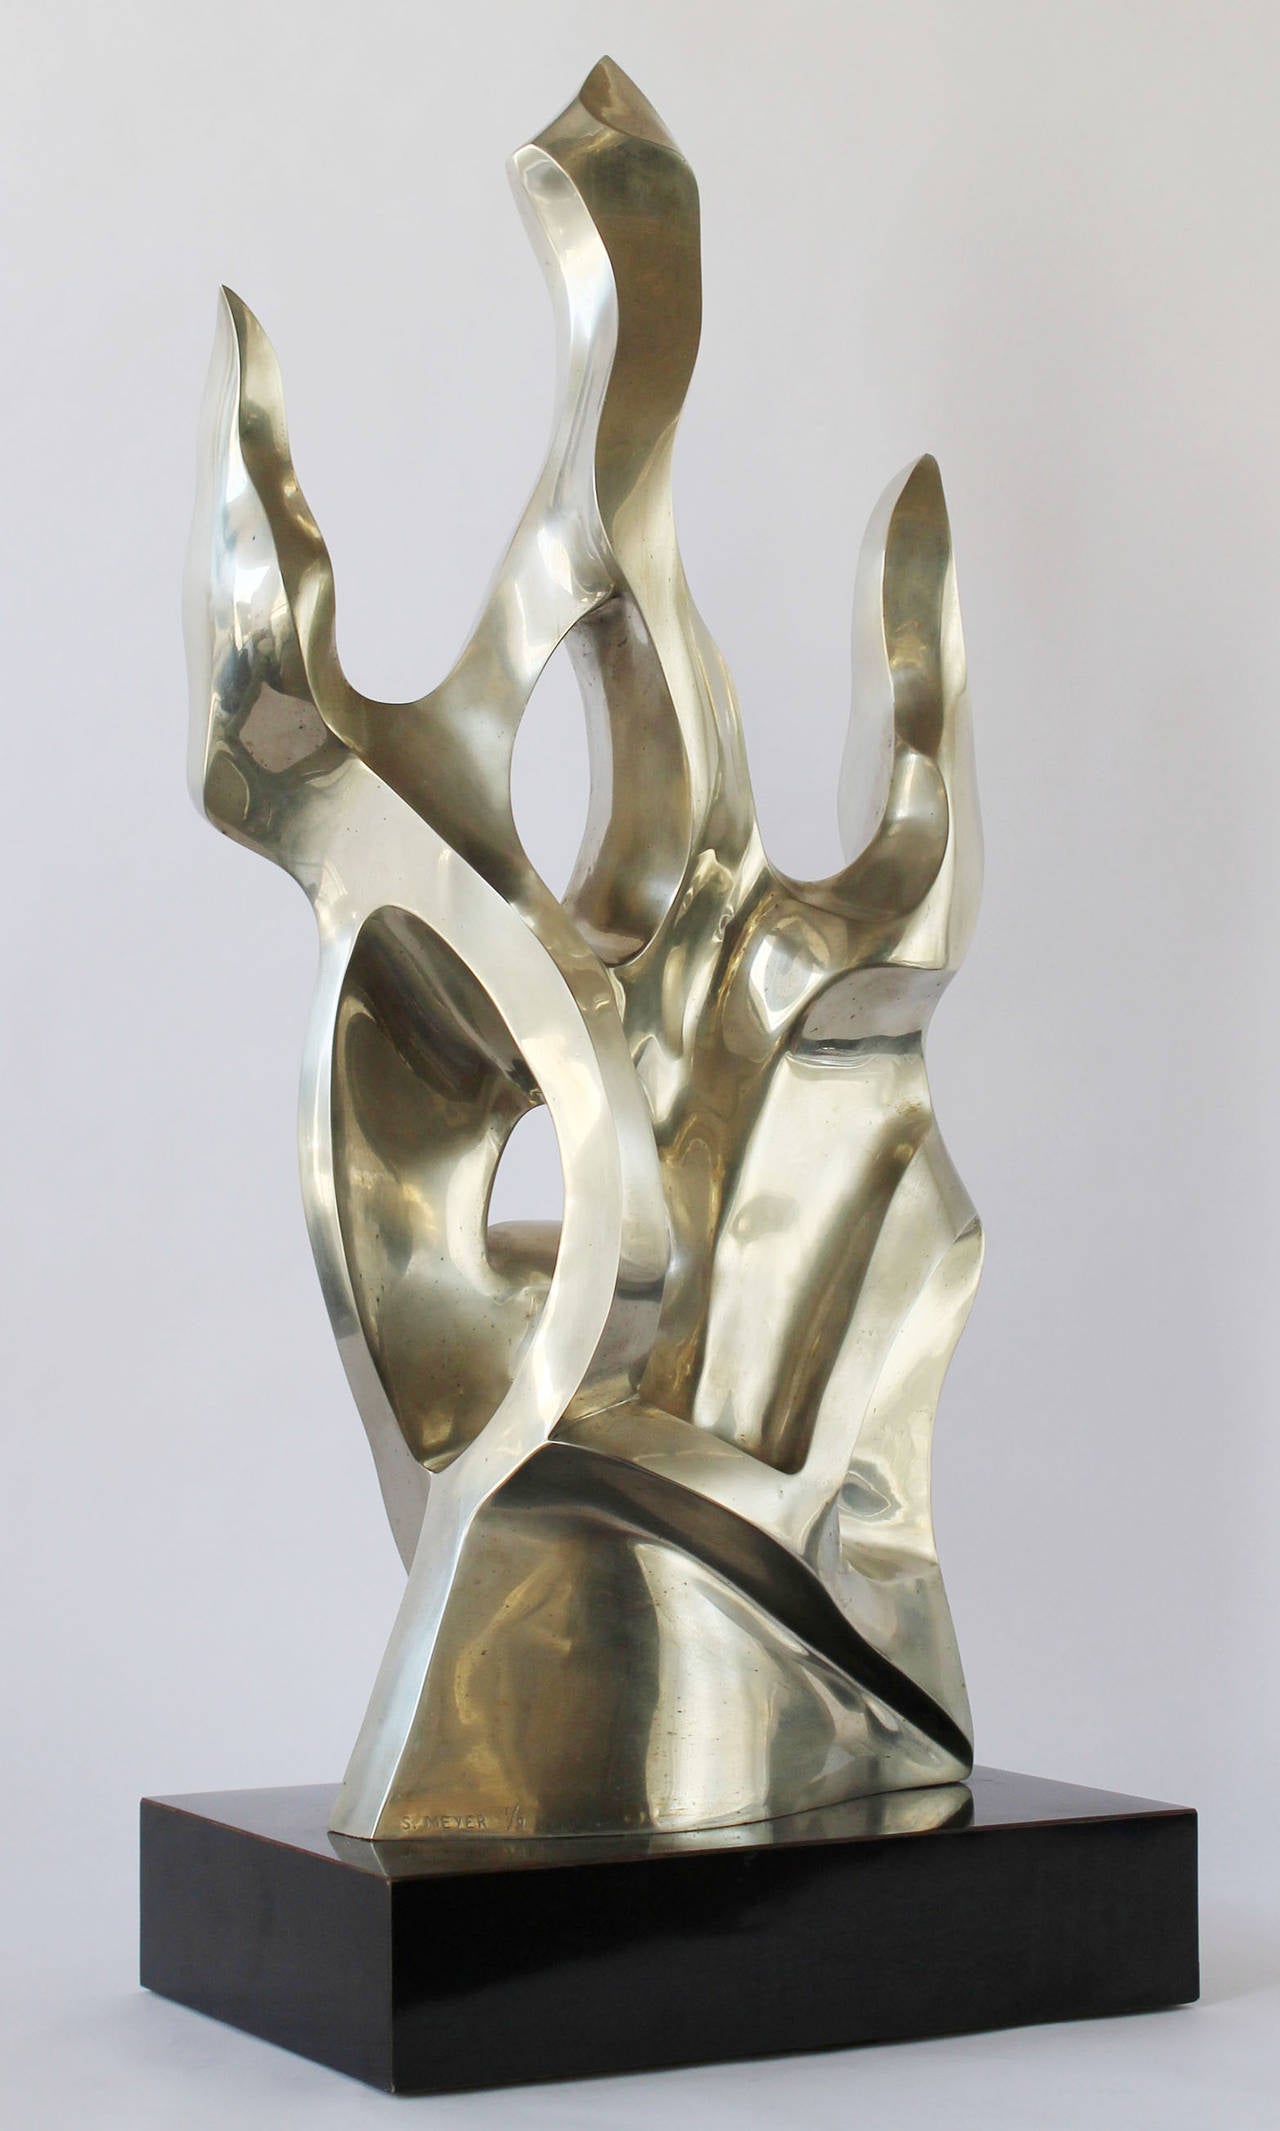 A magnificent solid bronze example of Seymour Meyer's (1914-2009) abstract sculptural forms, mounted on an acrylic swivel base. Signed and labelled; Edition:1/9.